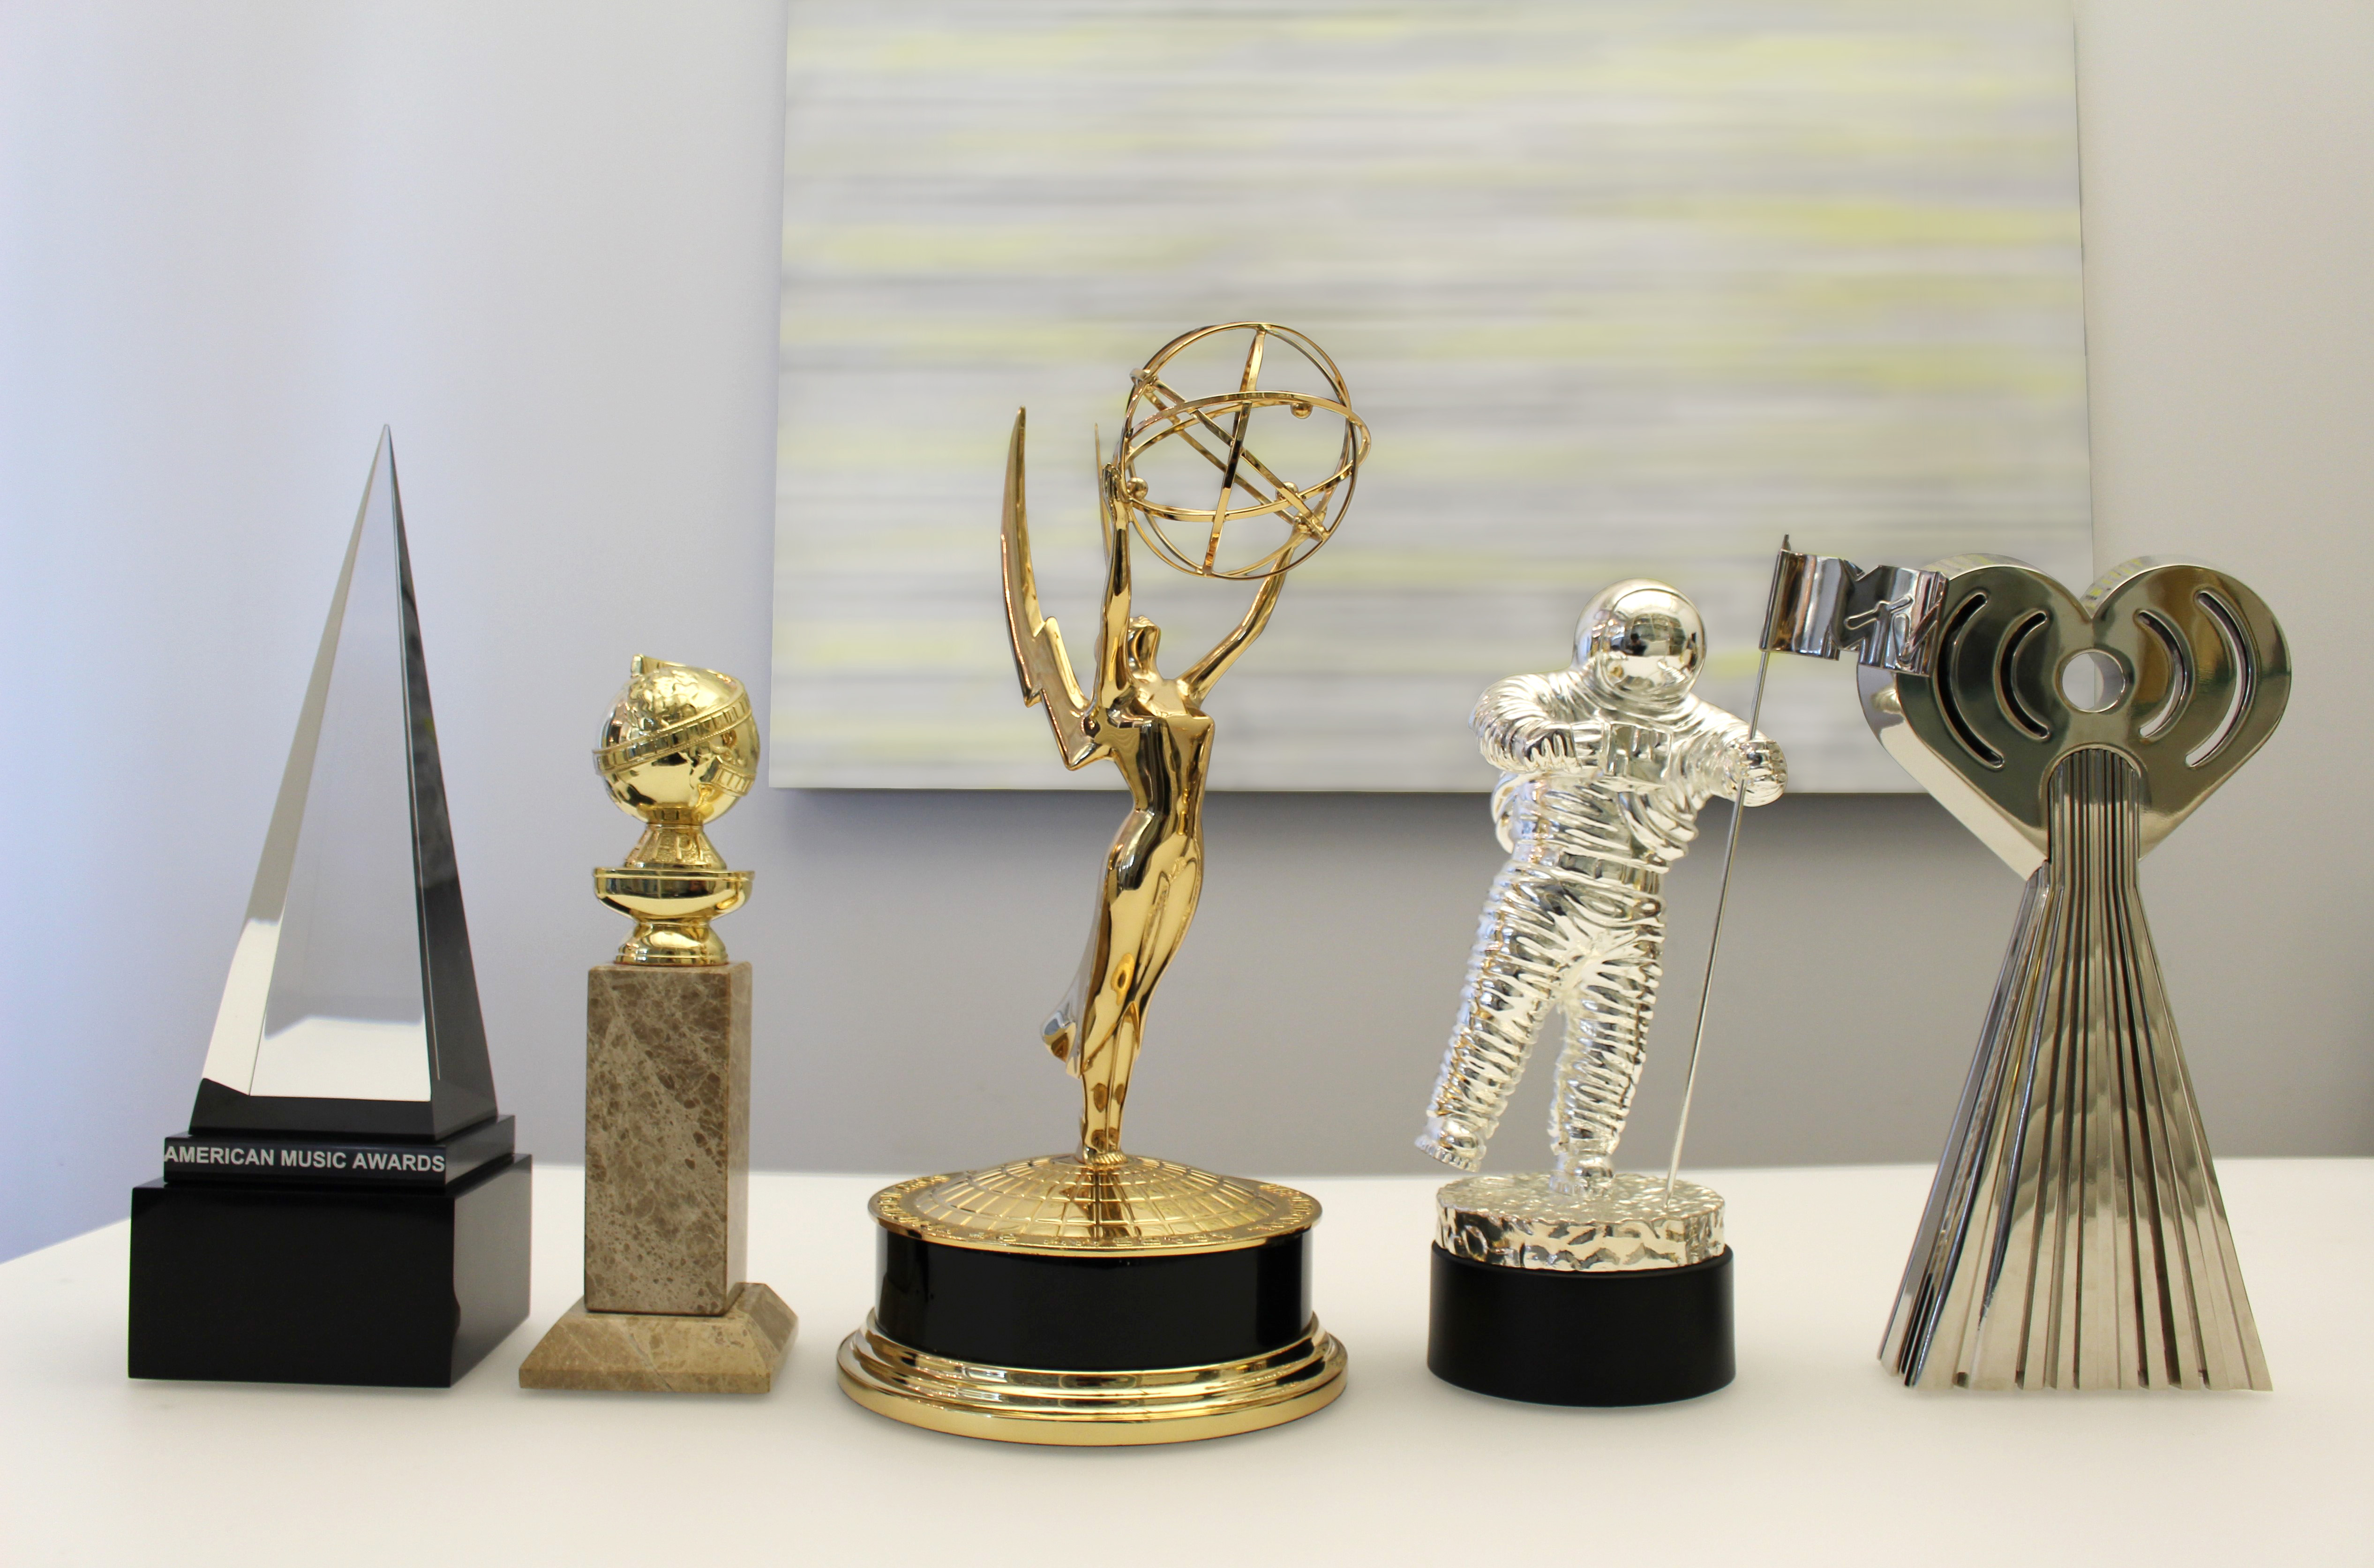 5 famous awards by Society Awards lined up on white table. From left to right: AMA, Golden Globe, Emmy, MTV VMA, iHeartRadio Music Award.